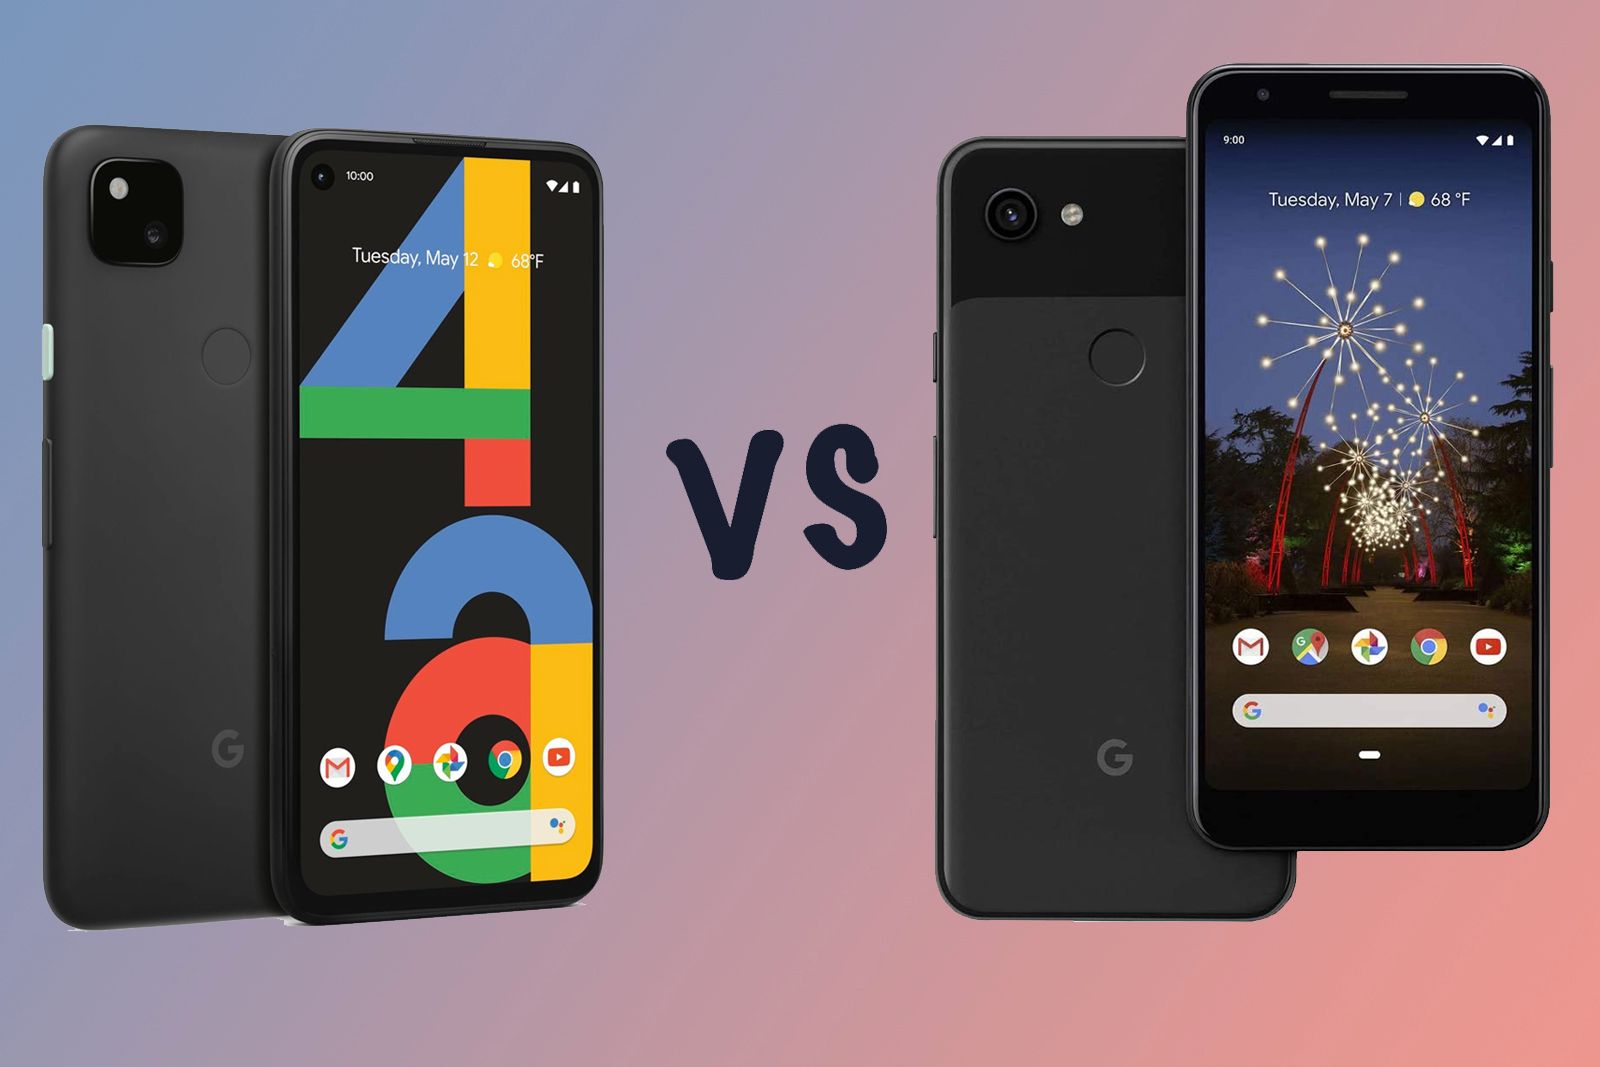 Google Pixel 4a vs Pixel 3a: What's the difference? photo 1